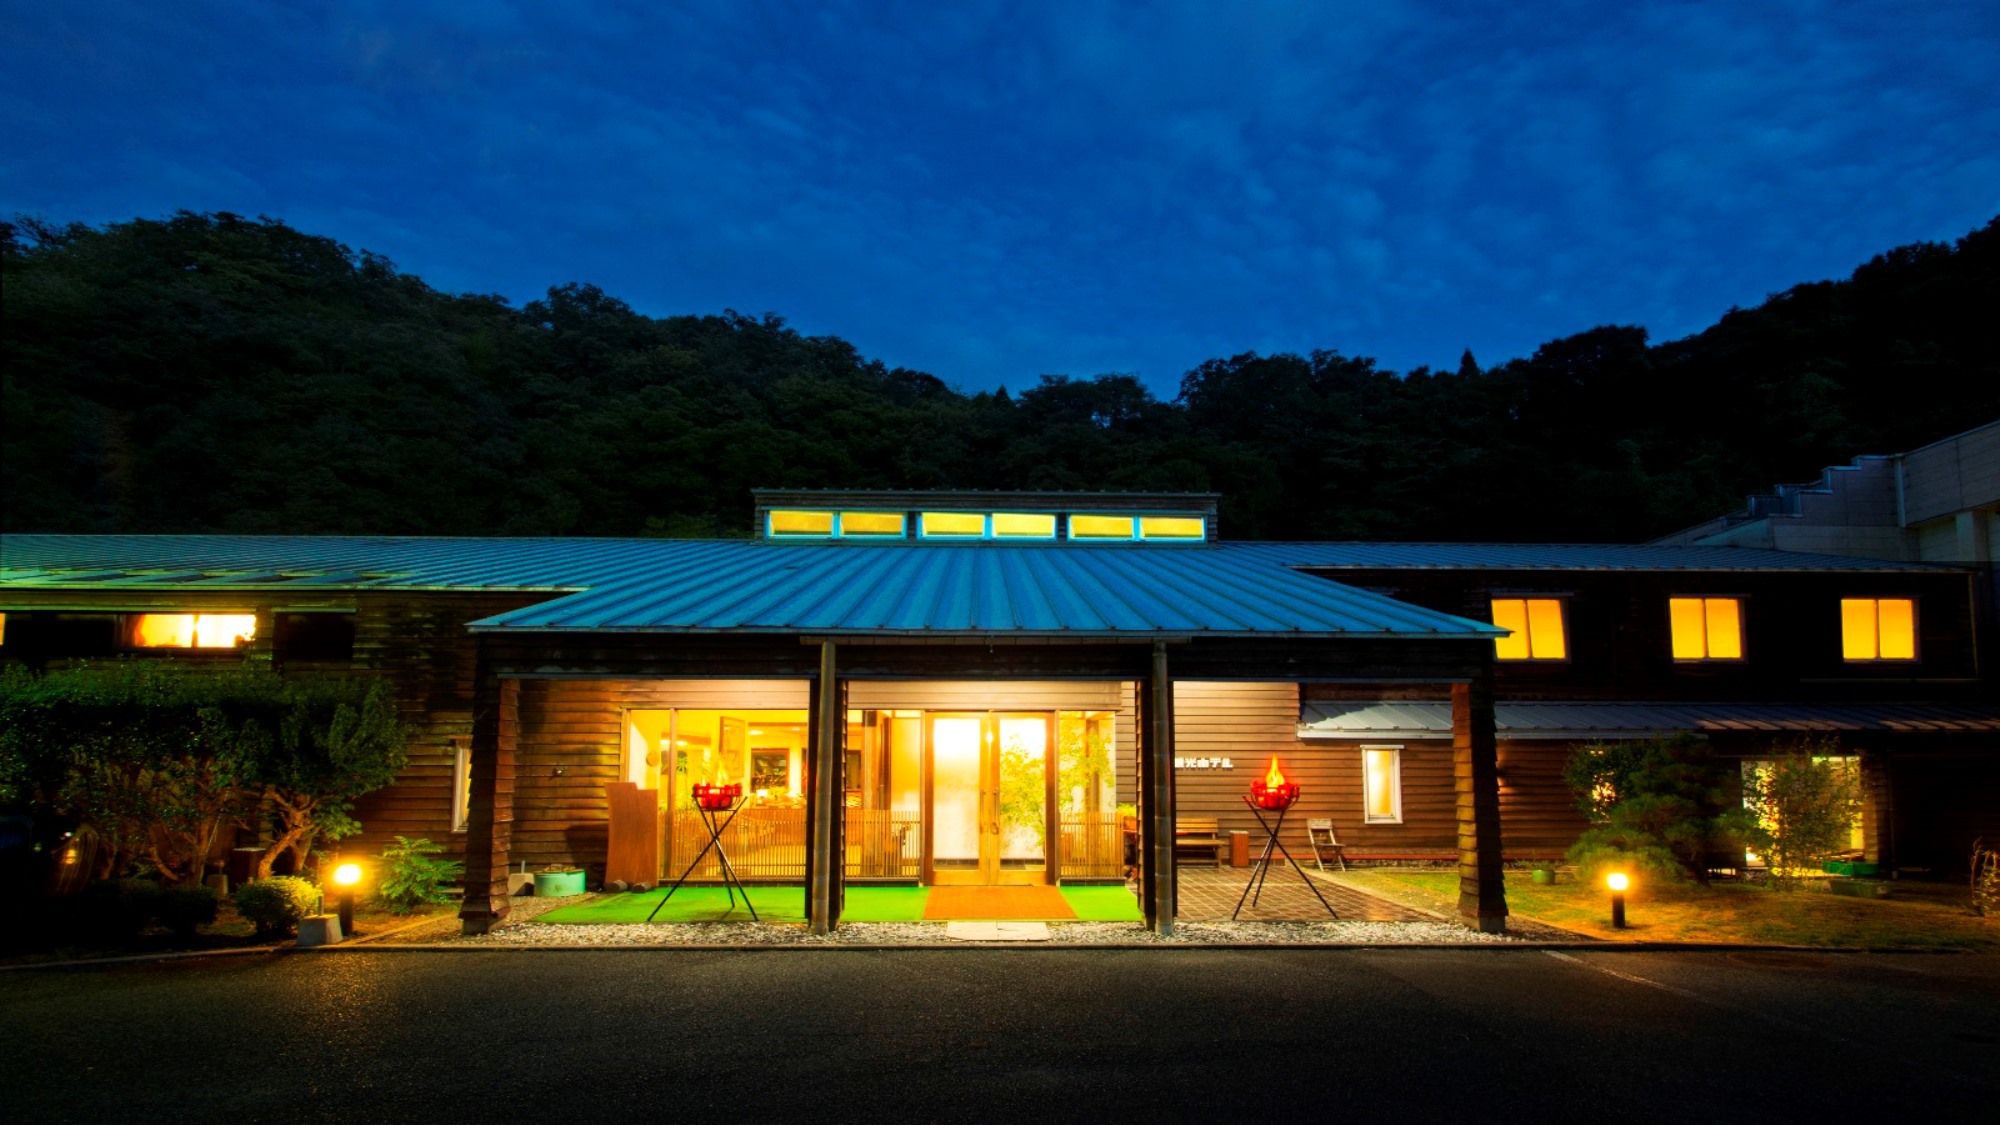 Mimata Onsen Kanagikanko Hotel Mimata Onsen Kanagikanko Hotel is conveniently located in the popular Hamada area. The property offers guests a range of services and amenities designed to provide comfort and convenience. Take advant